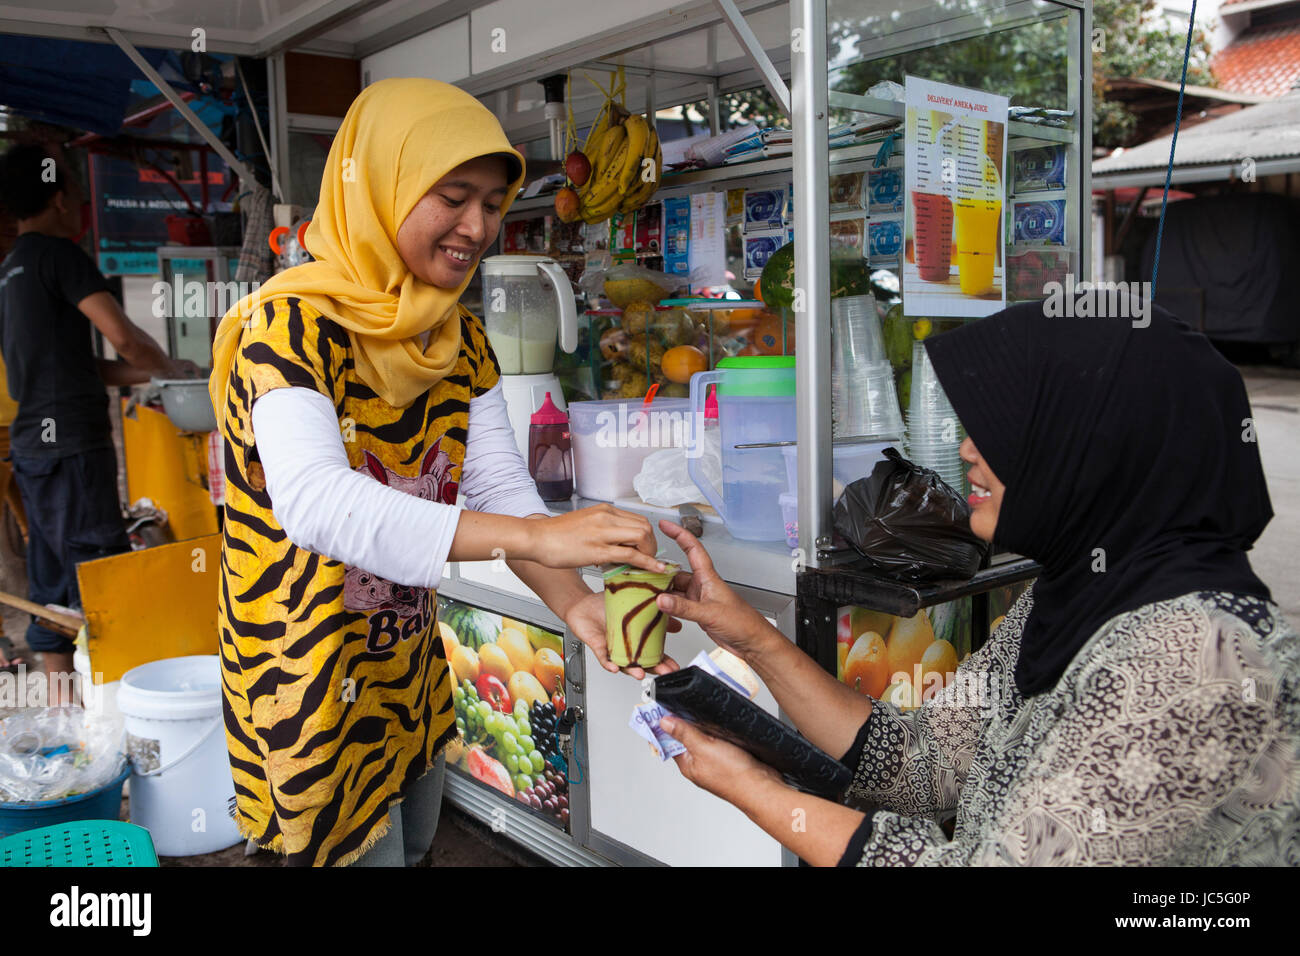 A women serving a fruit smoothie to a customer, Indonesia, Asia. Stock Photo